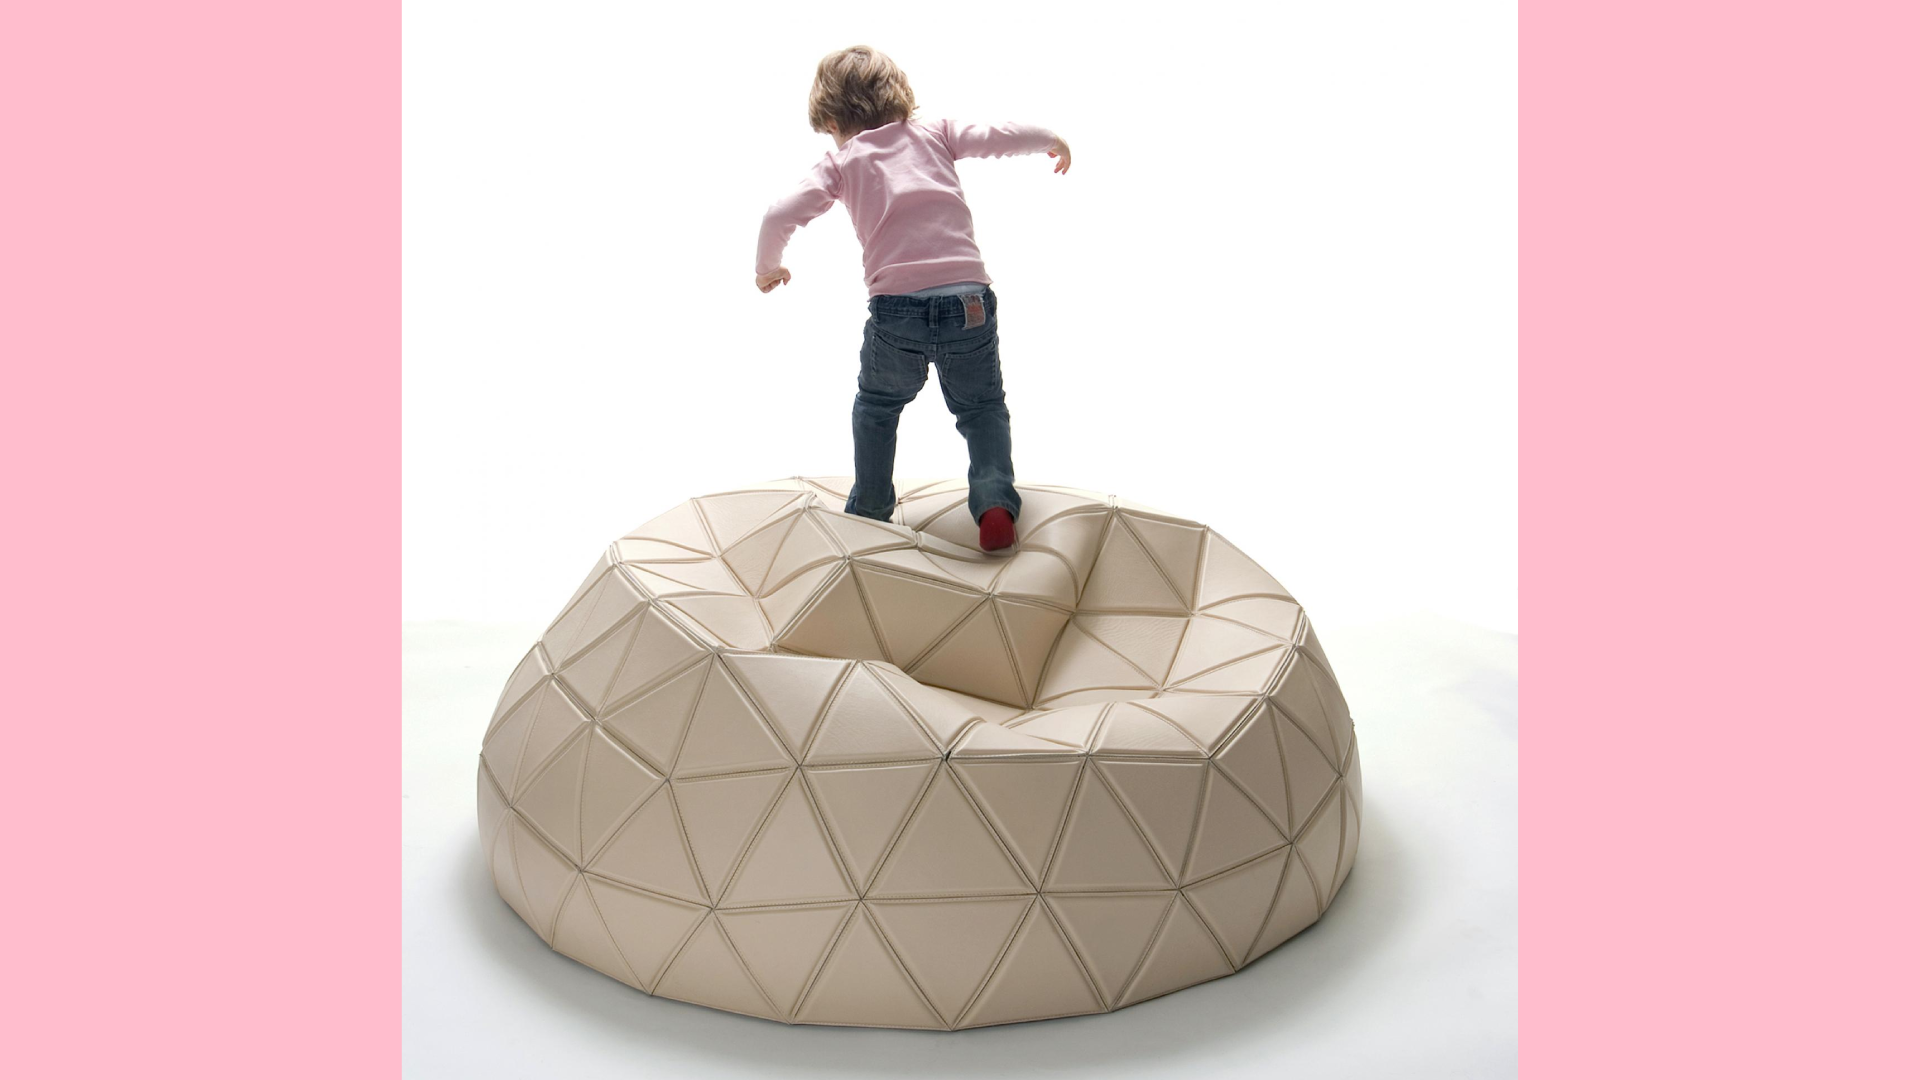 A young child is standing on a large, beige, geometrically-patterned bean bag, reminiscent of Buckminster Fuller's geodisic domes